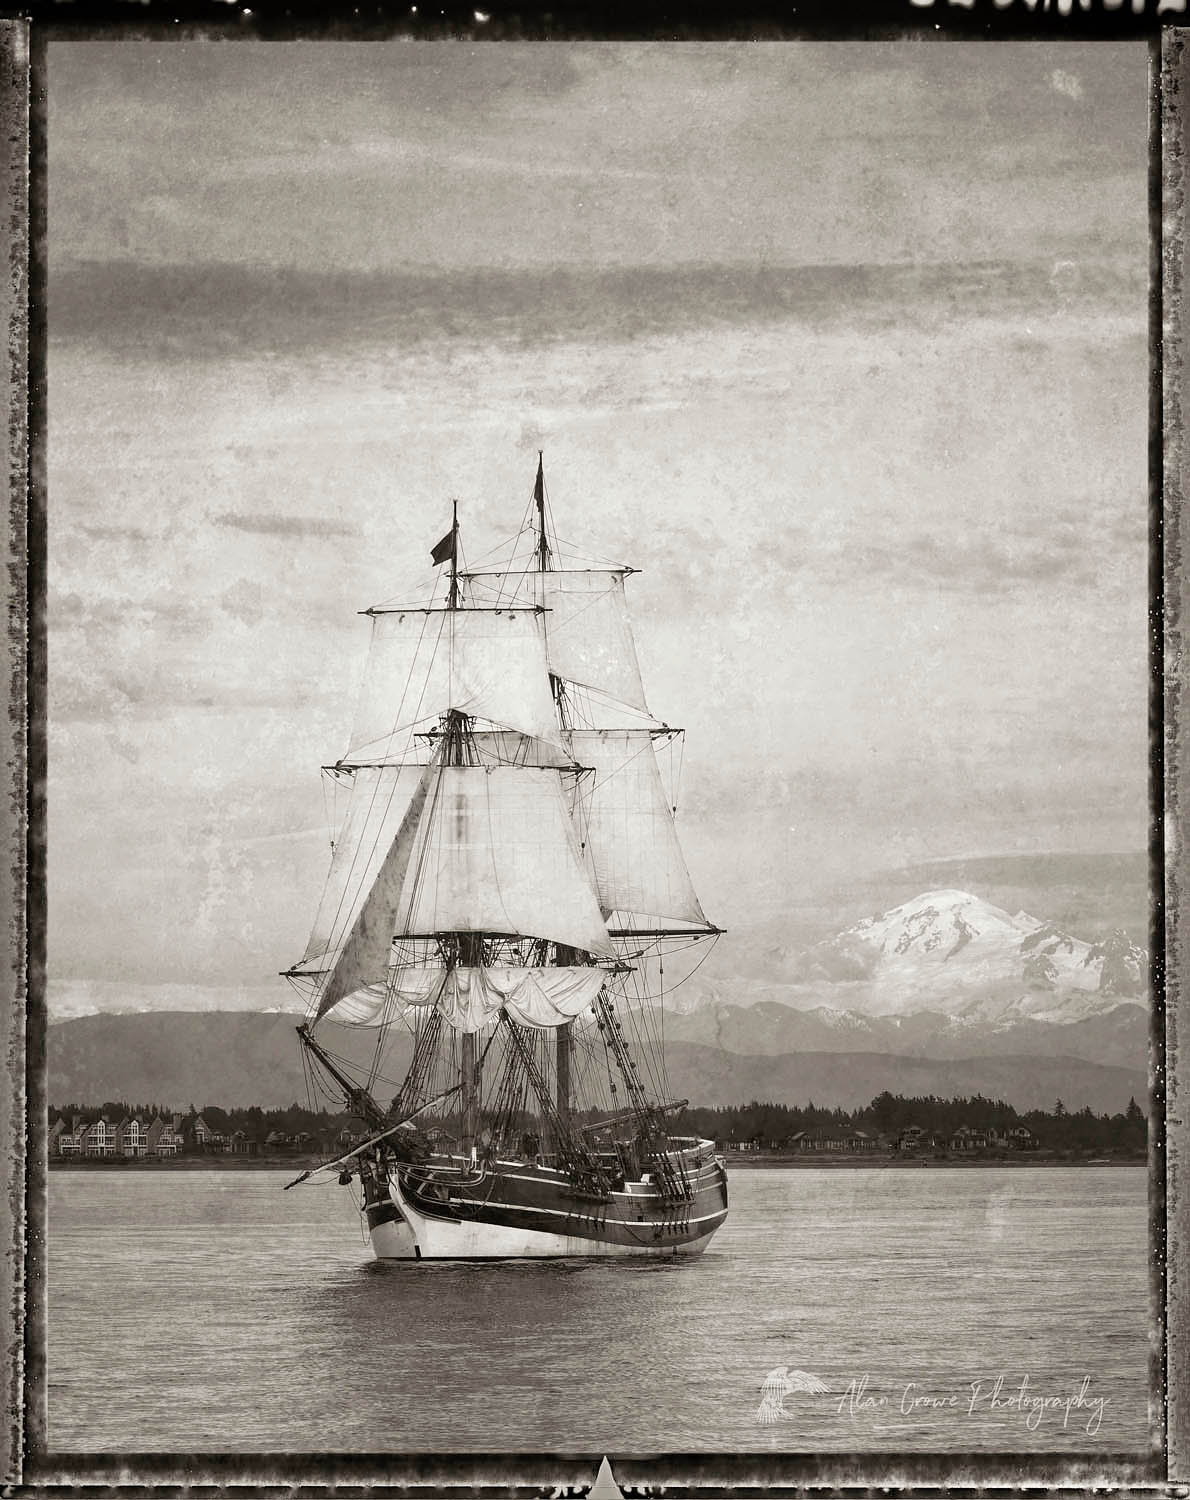 Lady Washington in Semiahmoo Bay, Washington. Mount Baker is in the distance. A historic replica of the original 18th Century brig. Owned and operated by the Grays Harbor Historical Seaport, Aberdeen, Washington #62510bwp